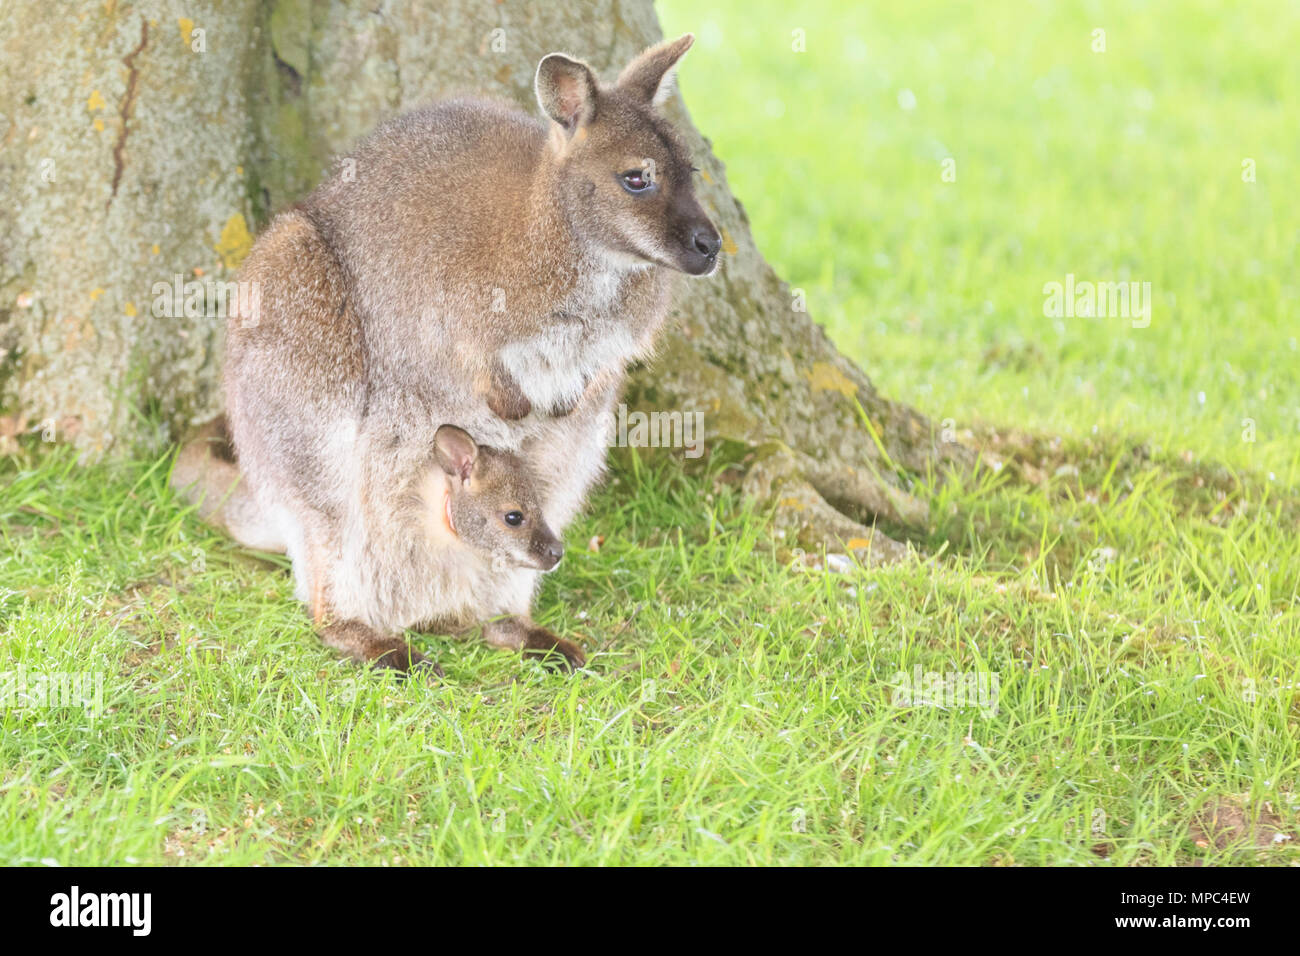 ZSL Whipsnade, Bedfordshire, 22nd May 2018. A baby wallaby, known as a joey, peeks out of its protective mum's pouch, then ventures out for some exploration on a warm and sunny afternoon at ZSL Whipsnade Zoo in Befordshire. Whipsade has a large resident group of Bennett’s Wallabies (Macropus rufogriseus), also called red necked wallabies. Joeys remain in their mum's pouch for nine month after birth, before starting to venture out into the world, but often skipping back to safety in the pouch. Credit: Imageplotter News and Sports/Alamy Live News Stock Photo